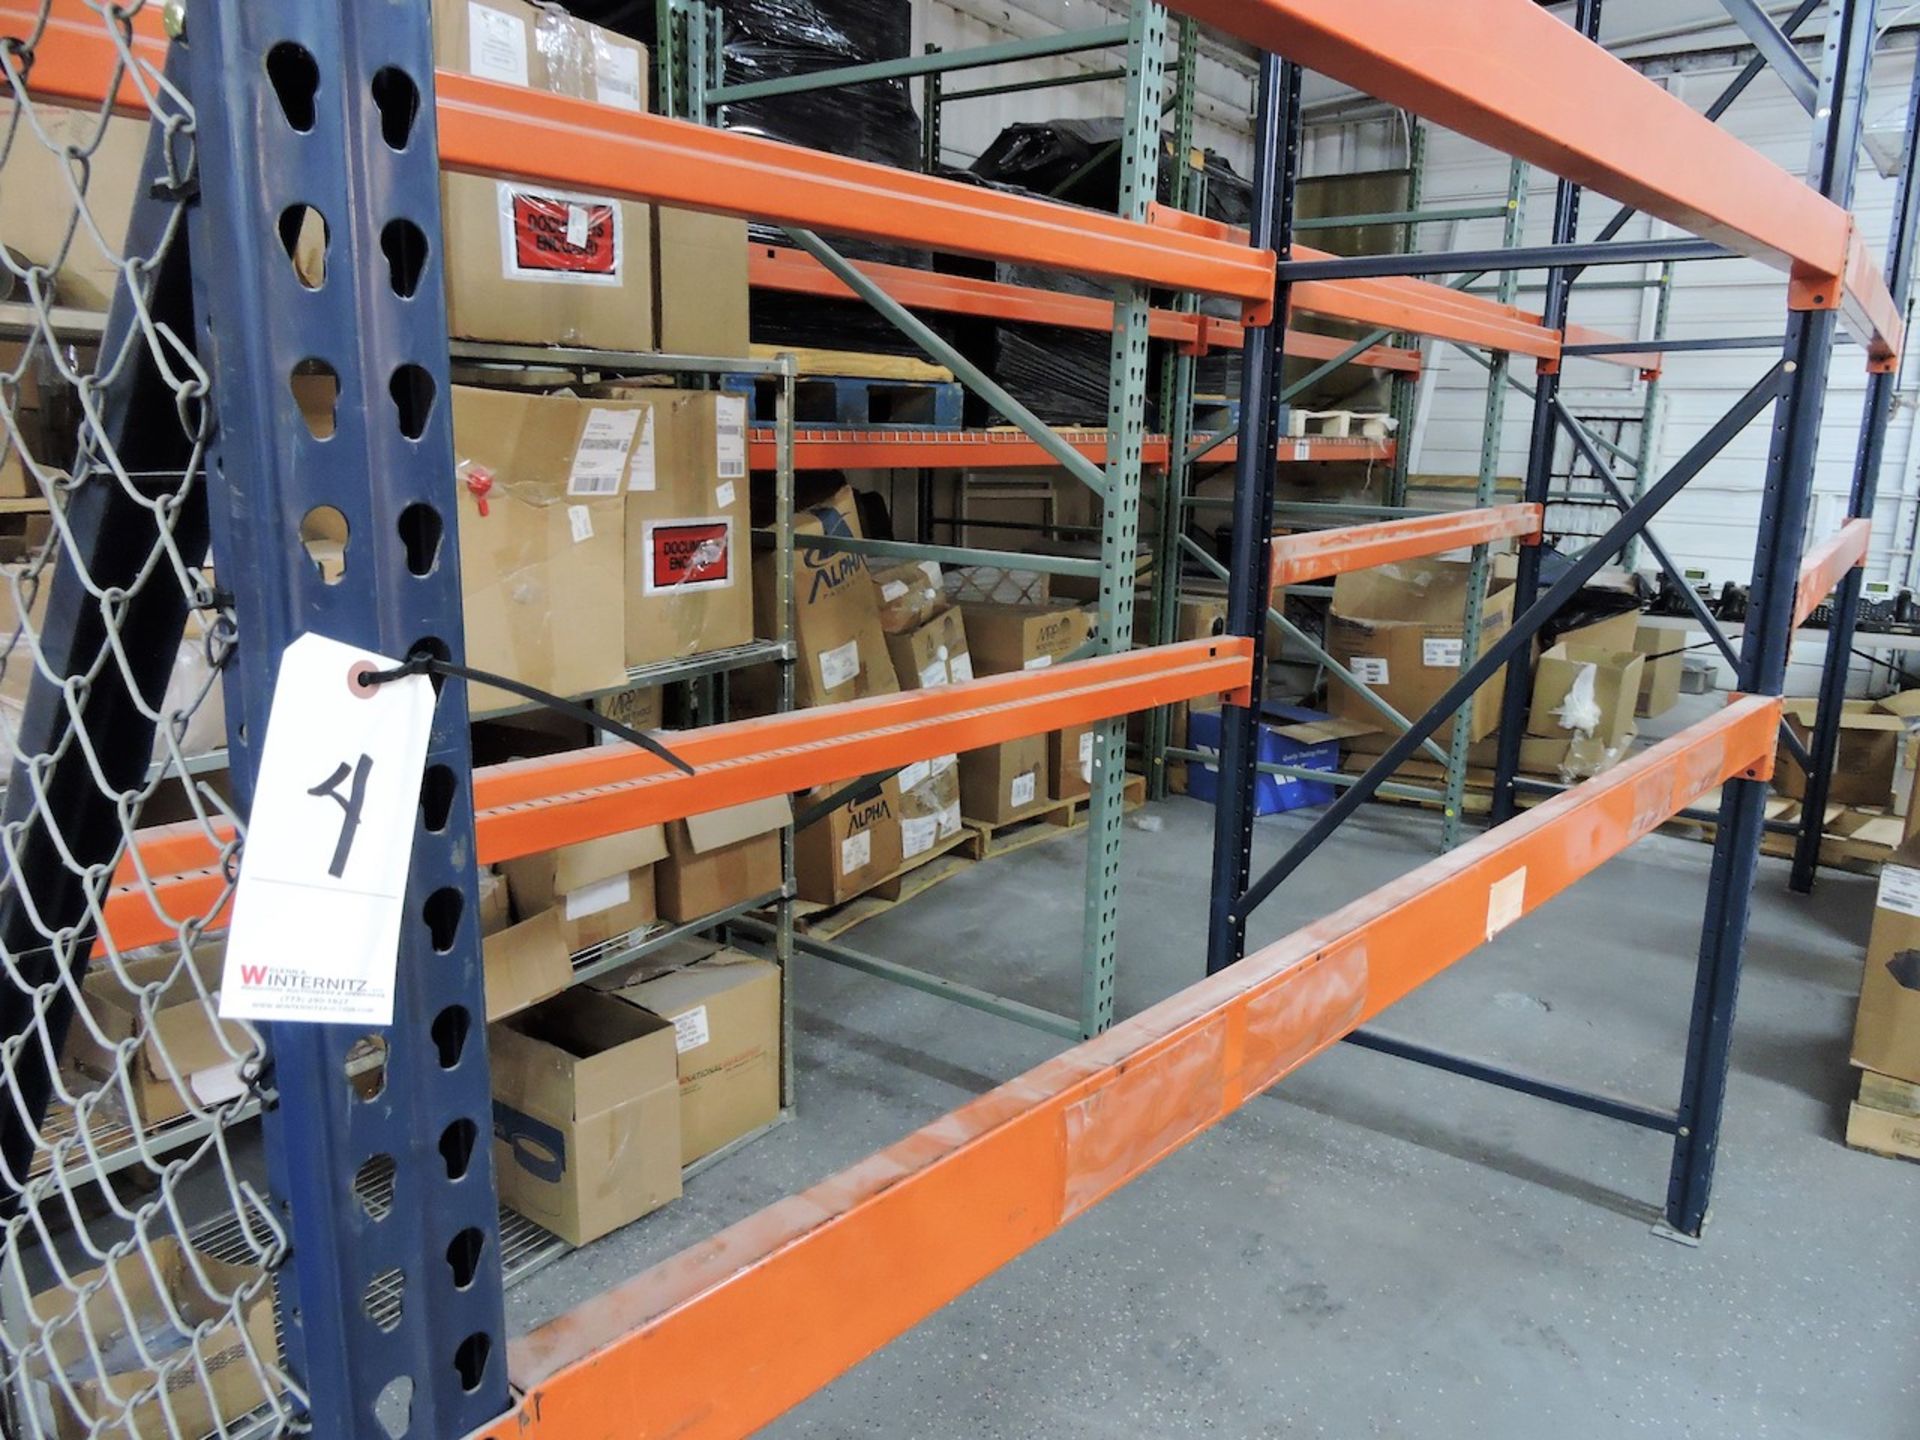 PALLET RACKING 4 UPRIGHTS 10 BEAMS 42” WIDE X 96” LONG X 12 FT HIGH 5000 LB LOAD CAPACITY - Image 2 of 2